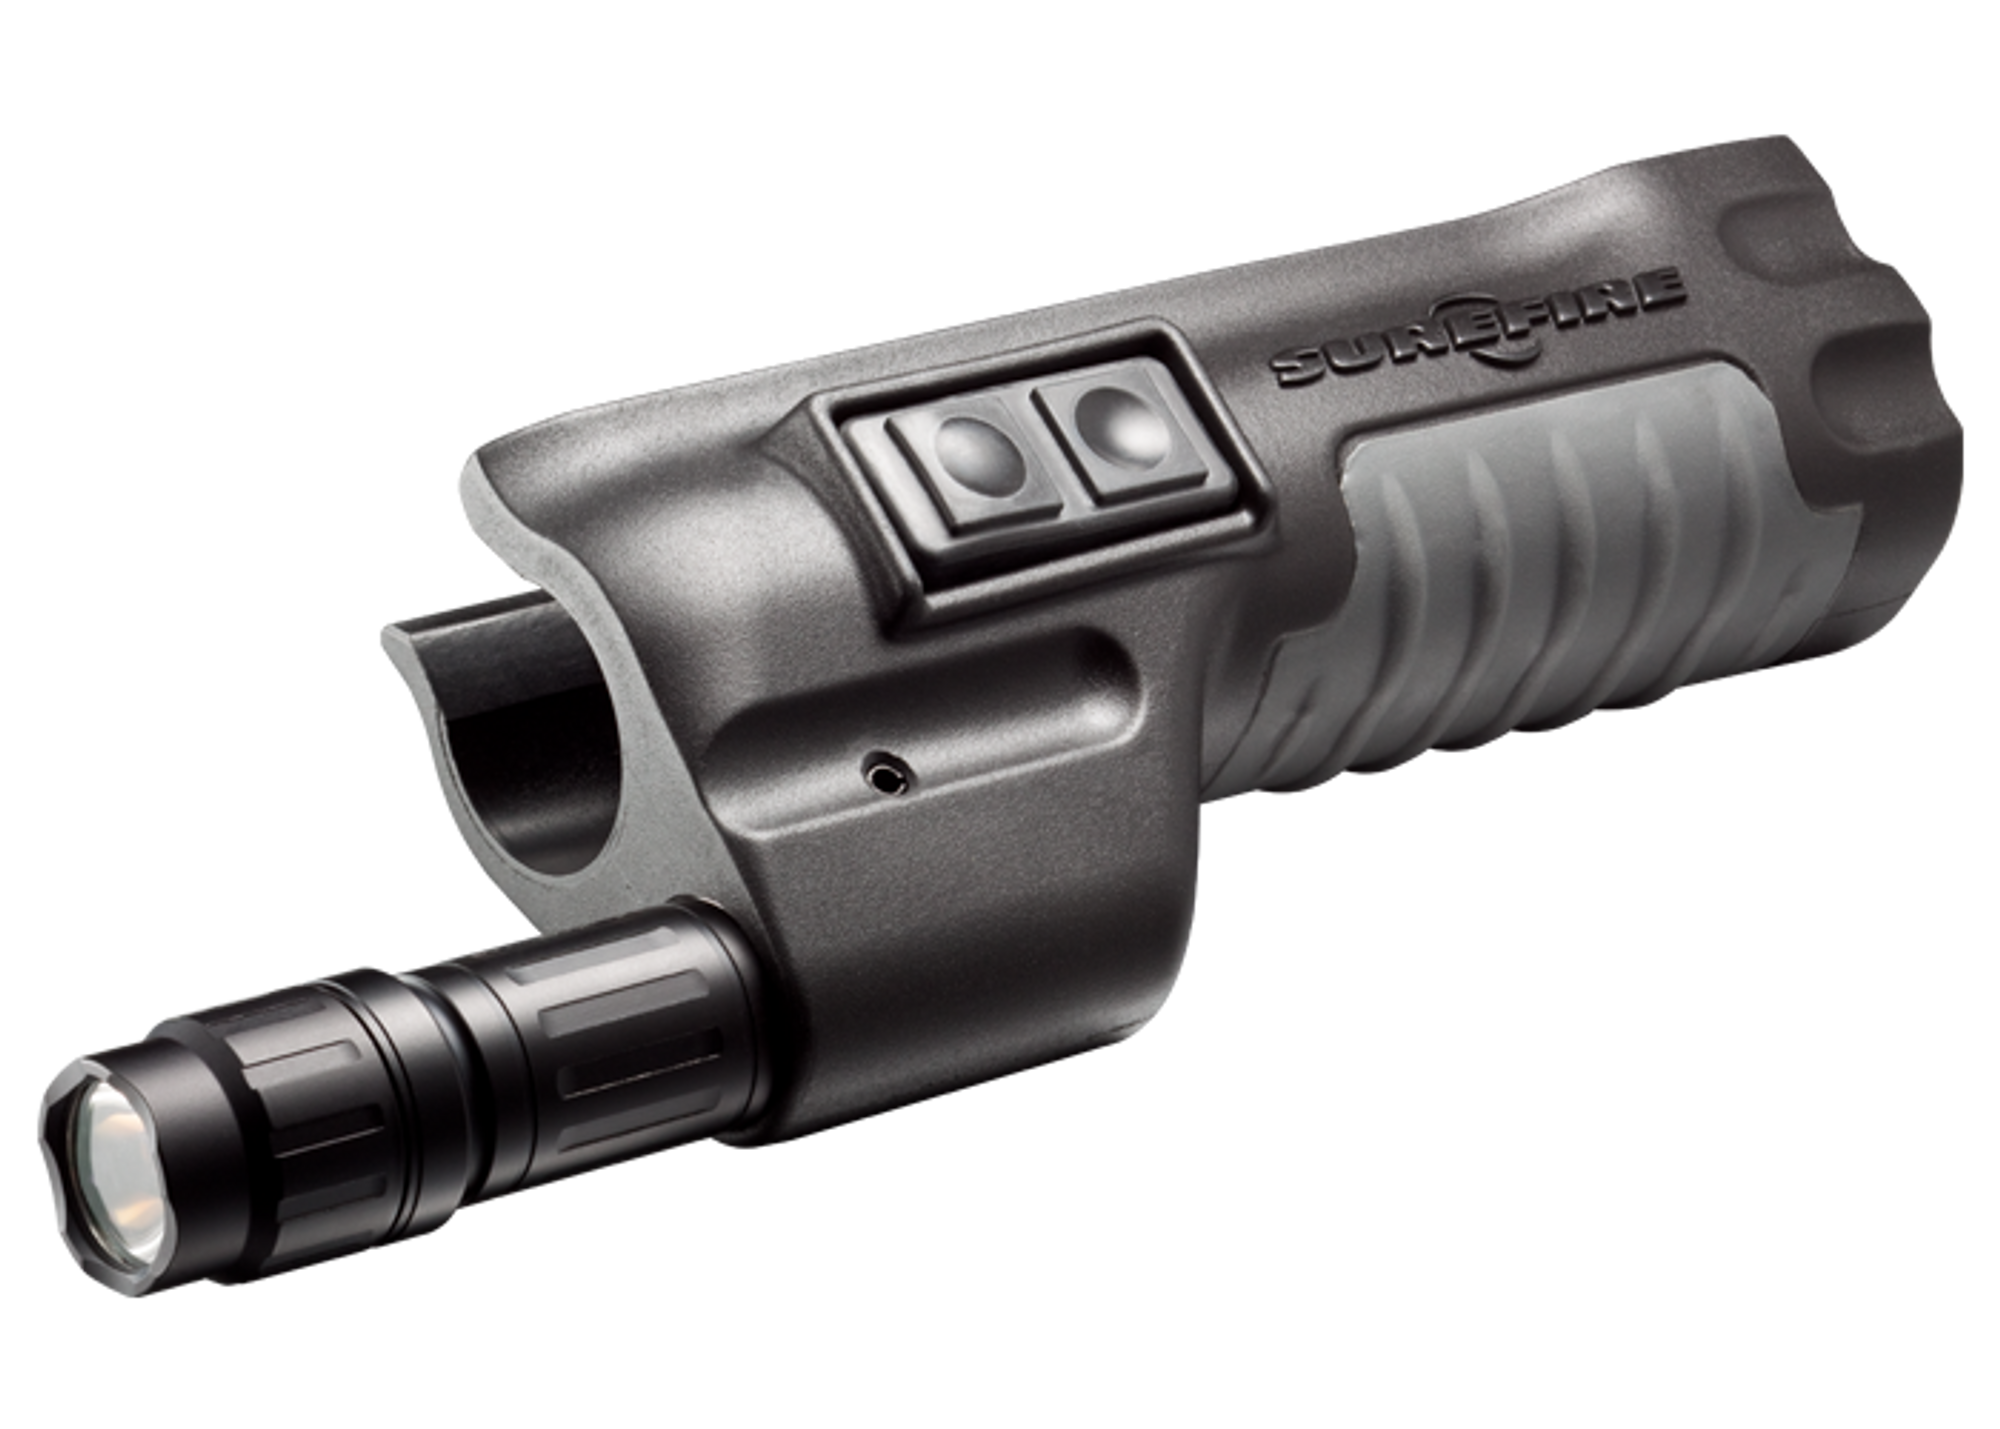 Surefire 623LMG for Mossberg 500/590 - 200 Lumens 3 Switches